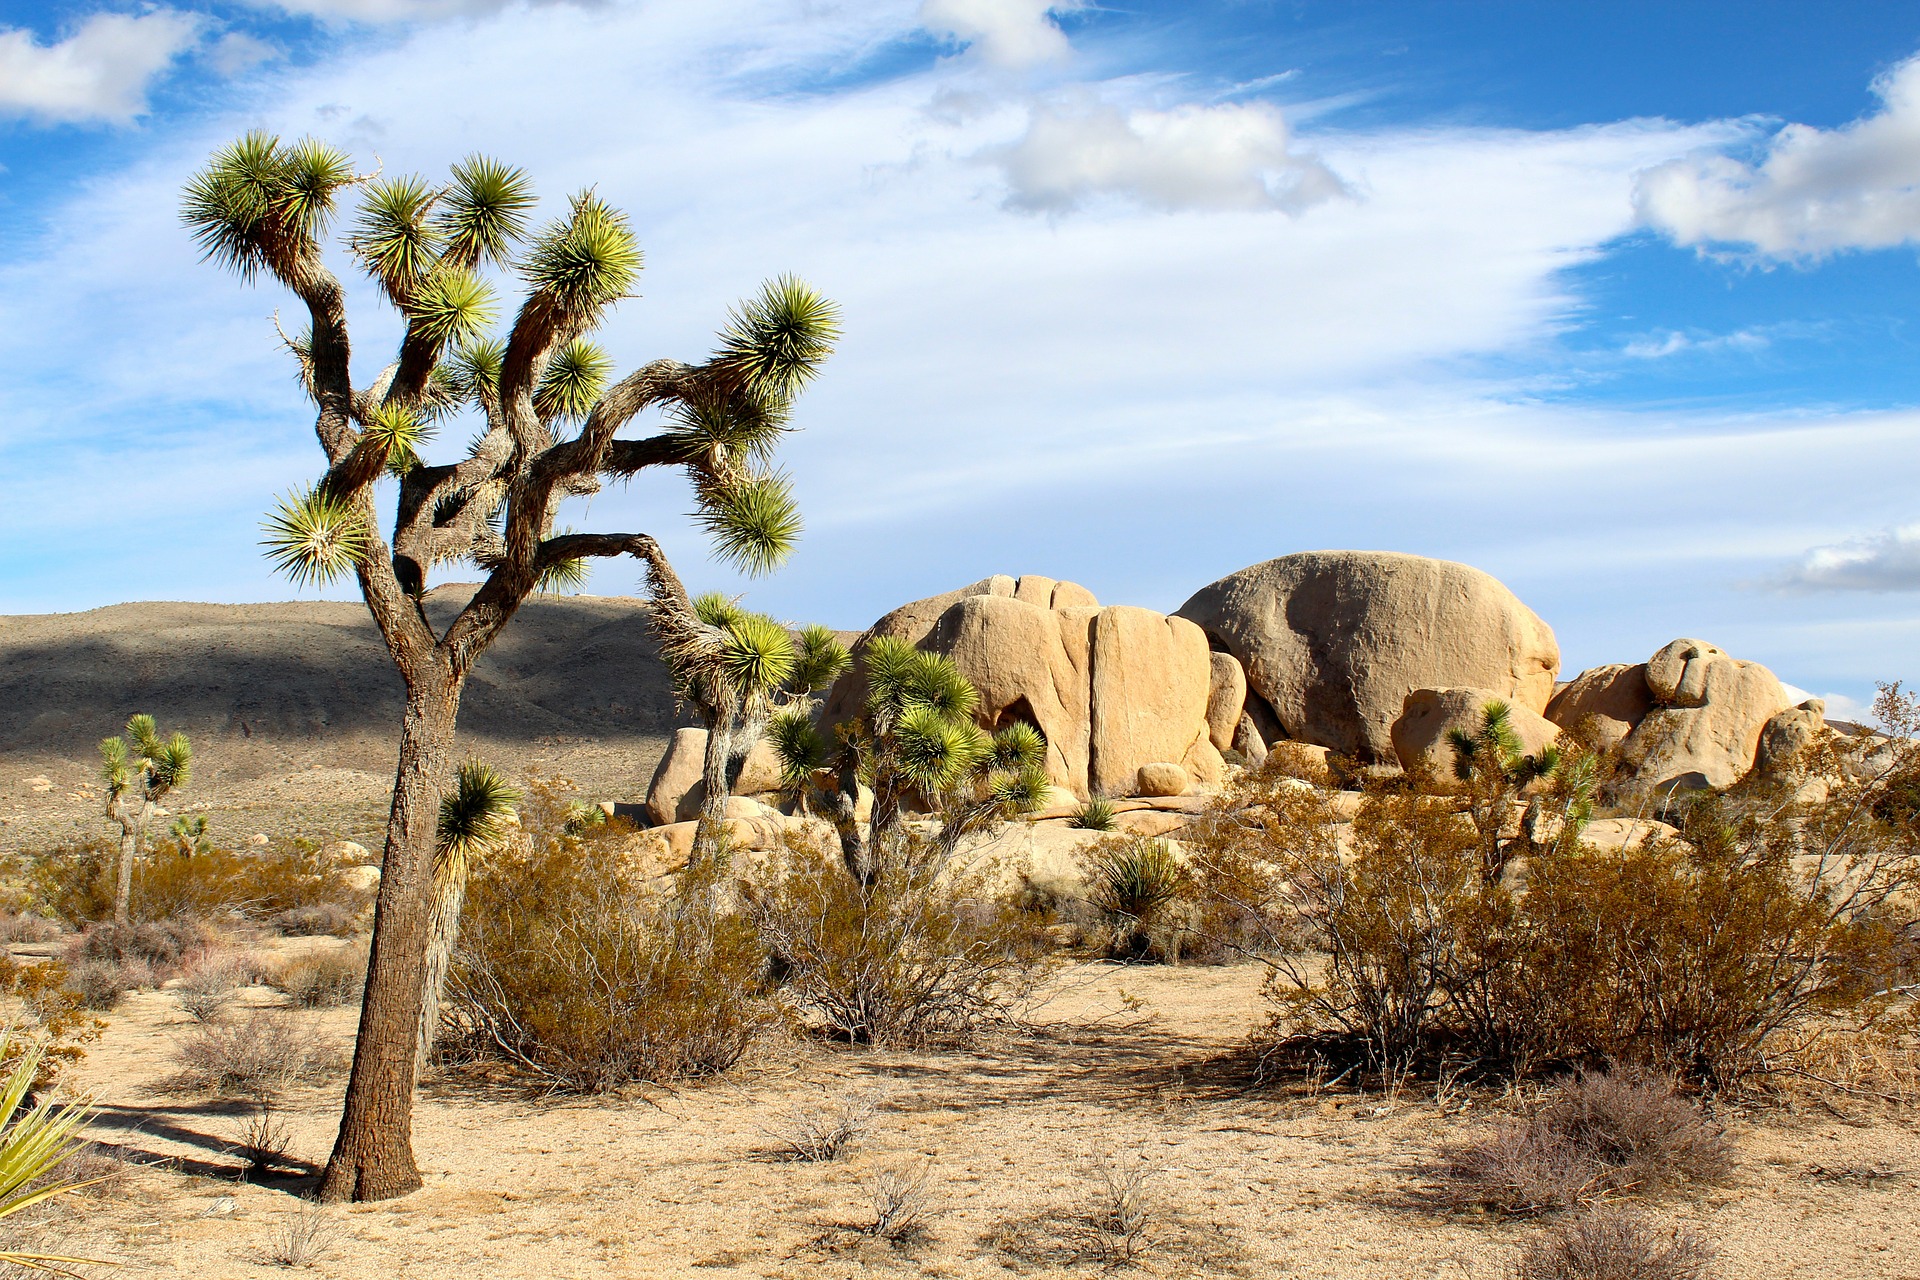 Southern California with Death Valley & Joshua Tree National Parks | Joshua Tree National Park, California, USA